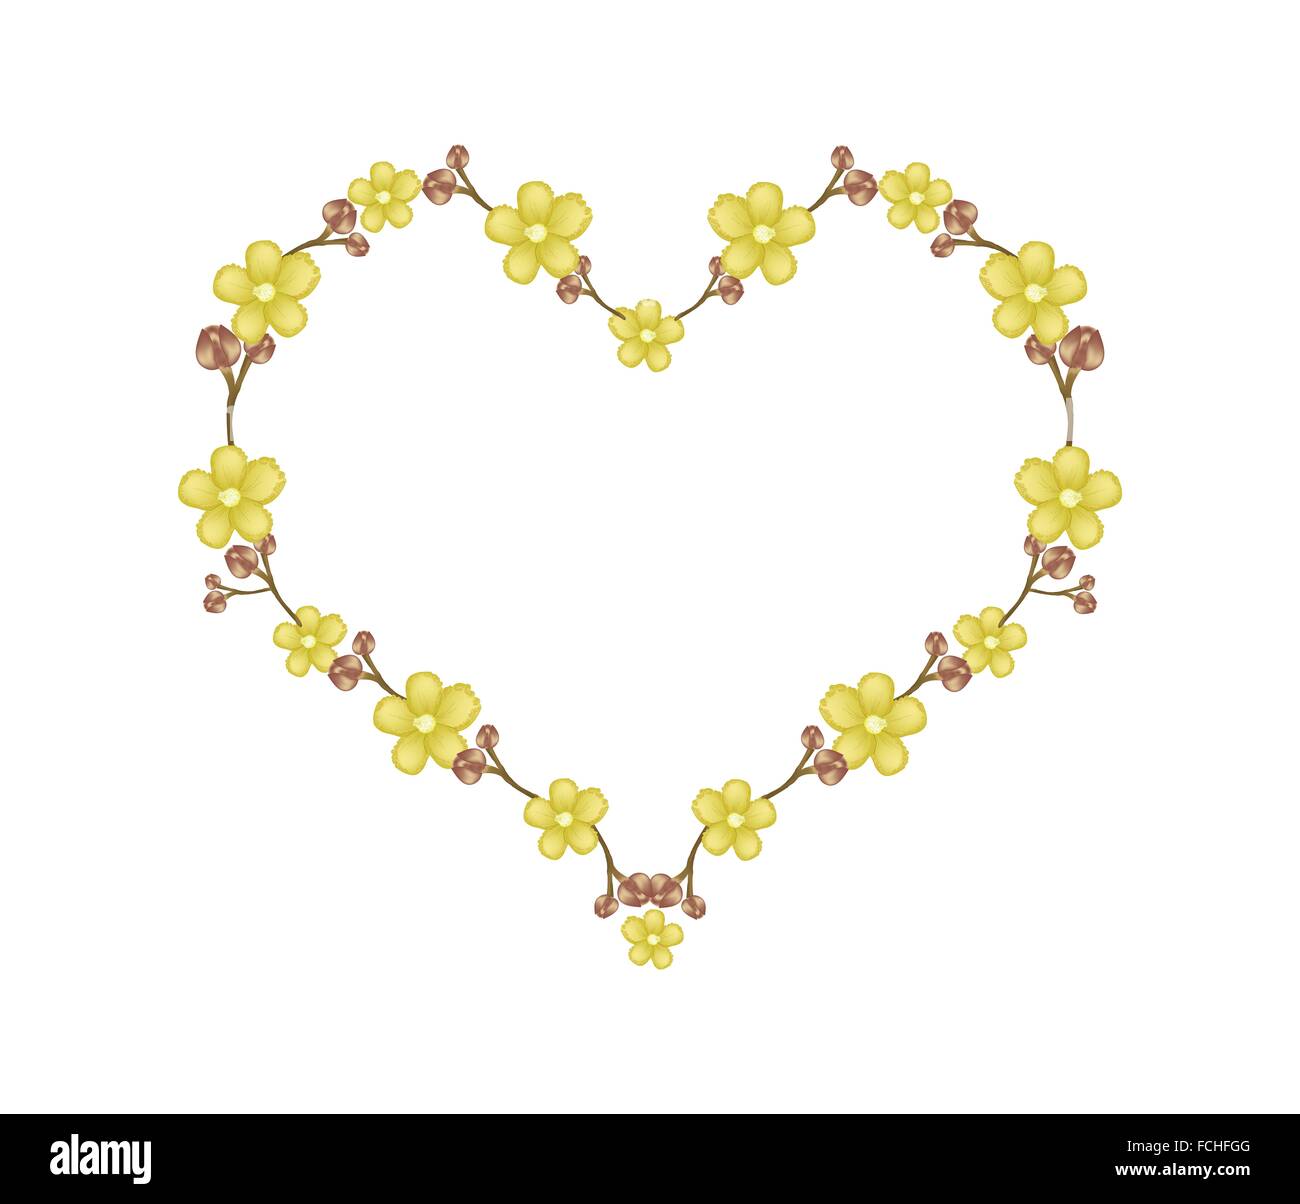 Love Concept, Illustration of Yellow Simpor Flowers Forming in Heart Shape Isolated on White Background. Stock Photo